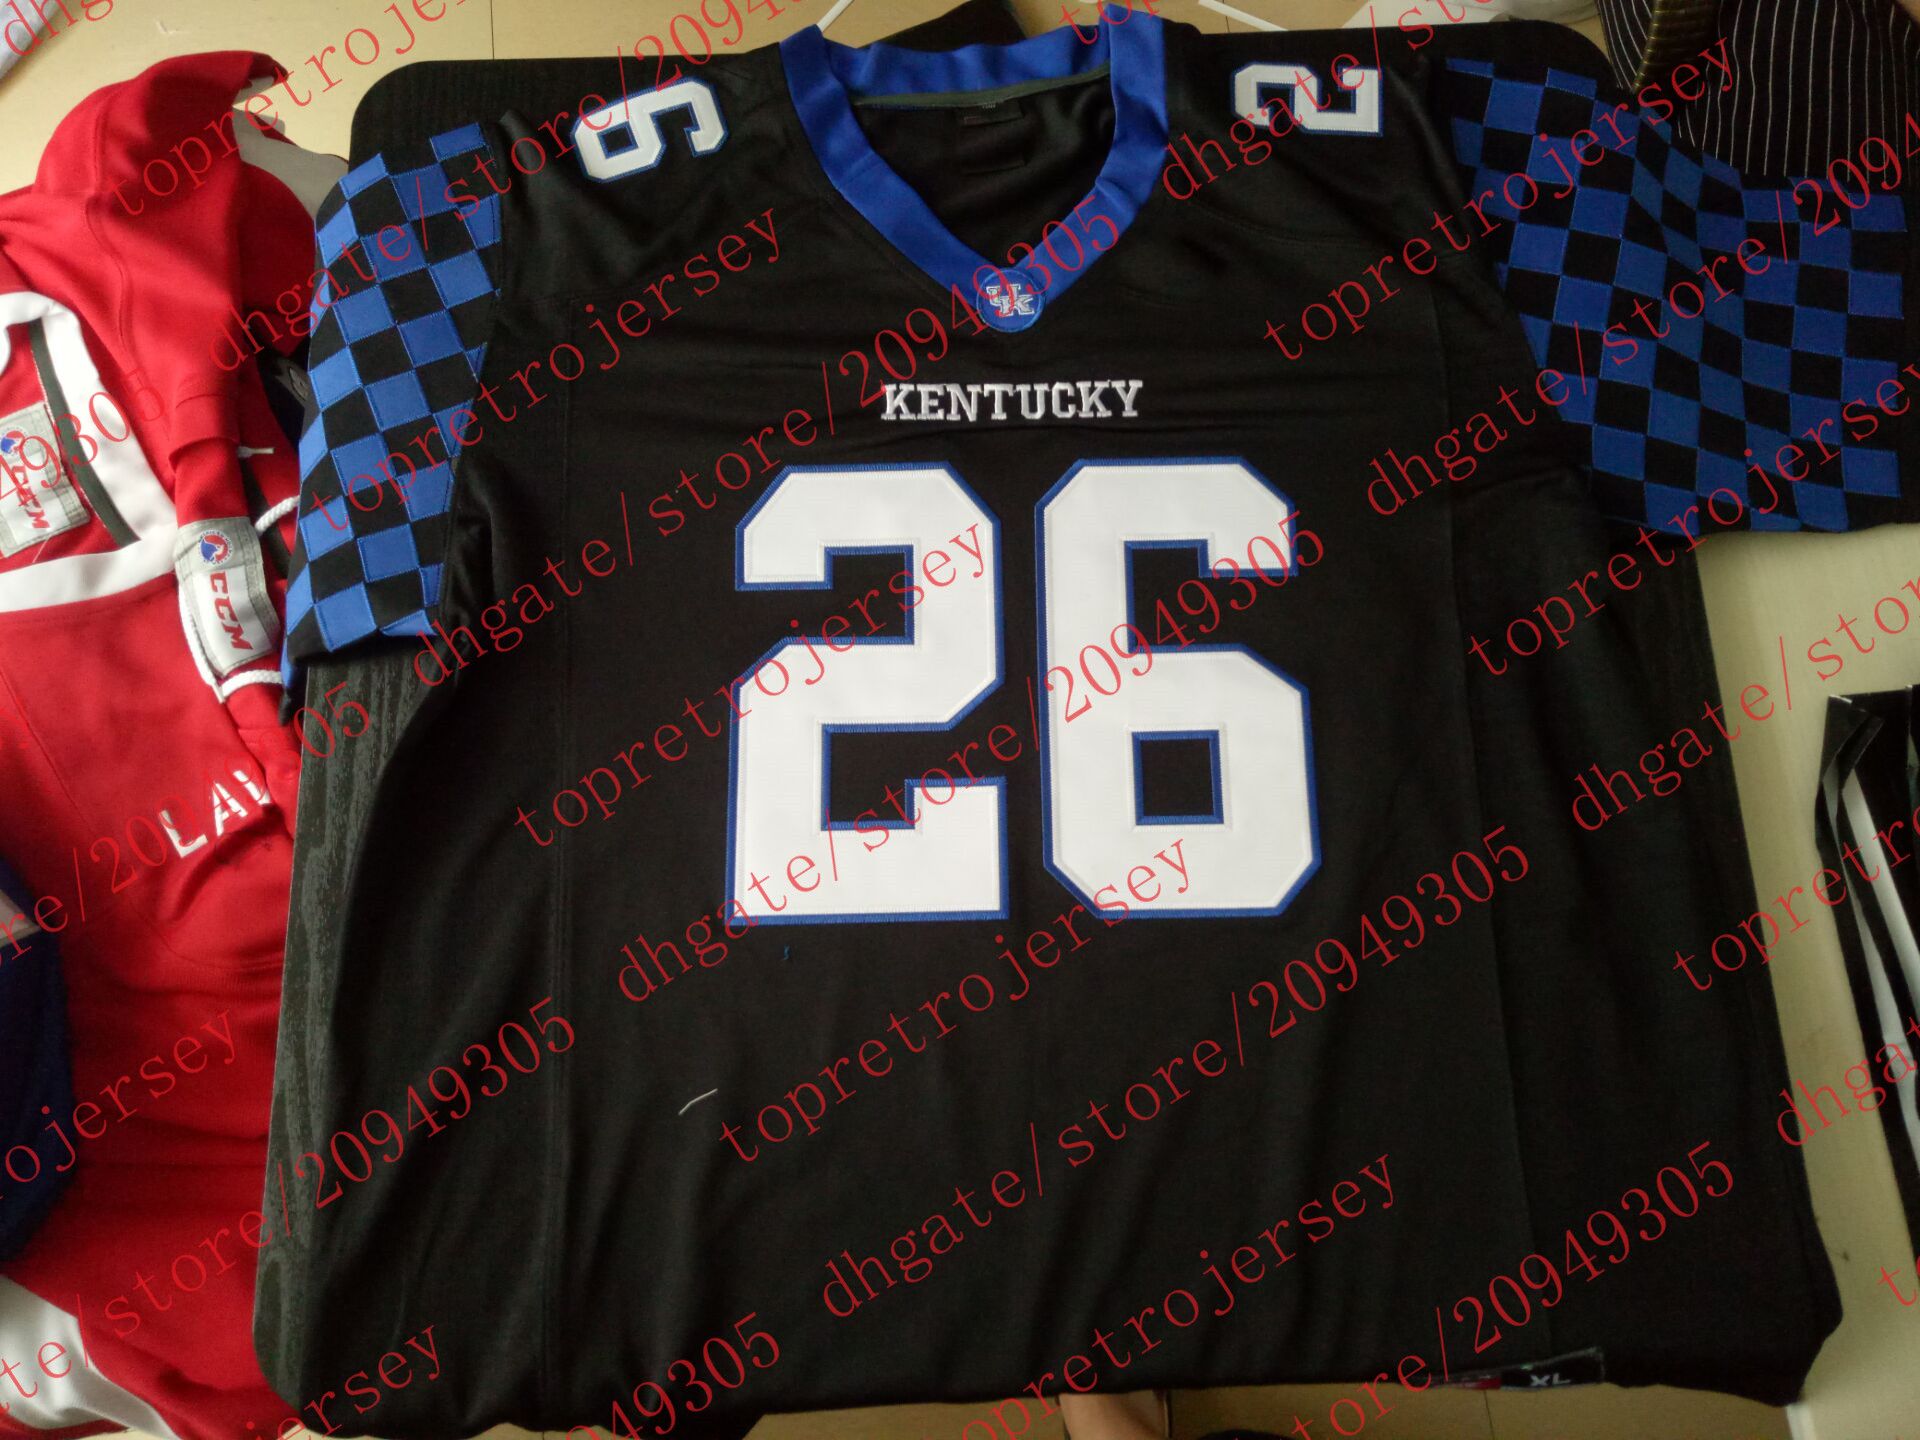 benny snell jersey number